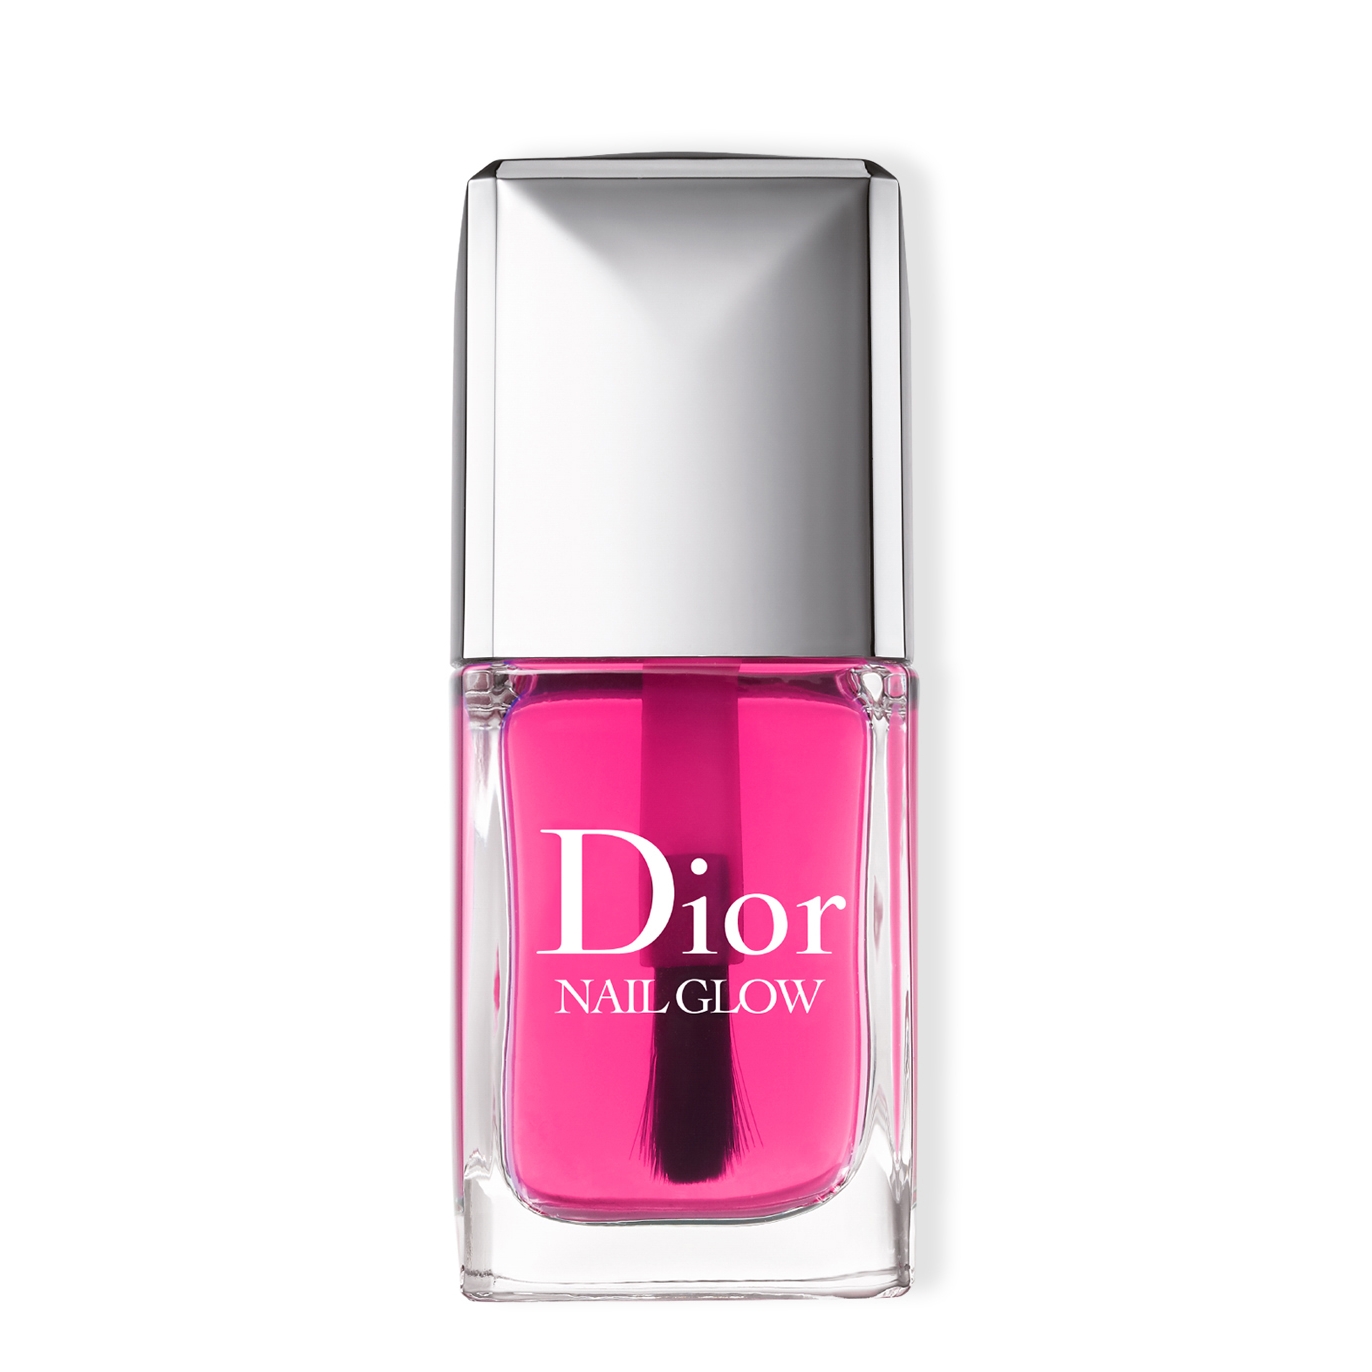 Dior Nail Glow Instant French Manicure Effect Brightening Treatment